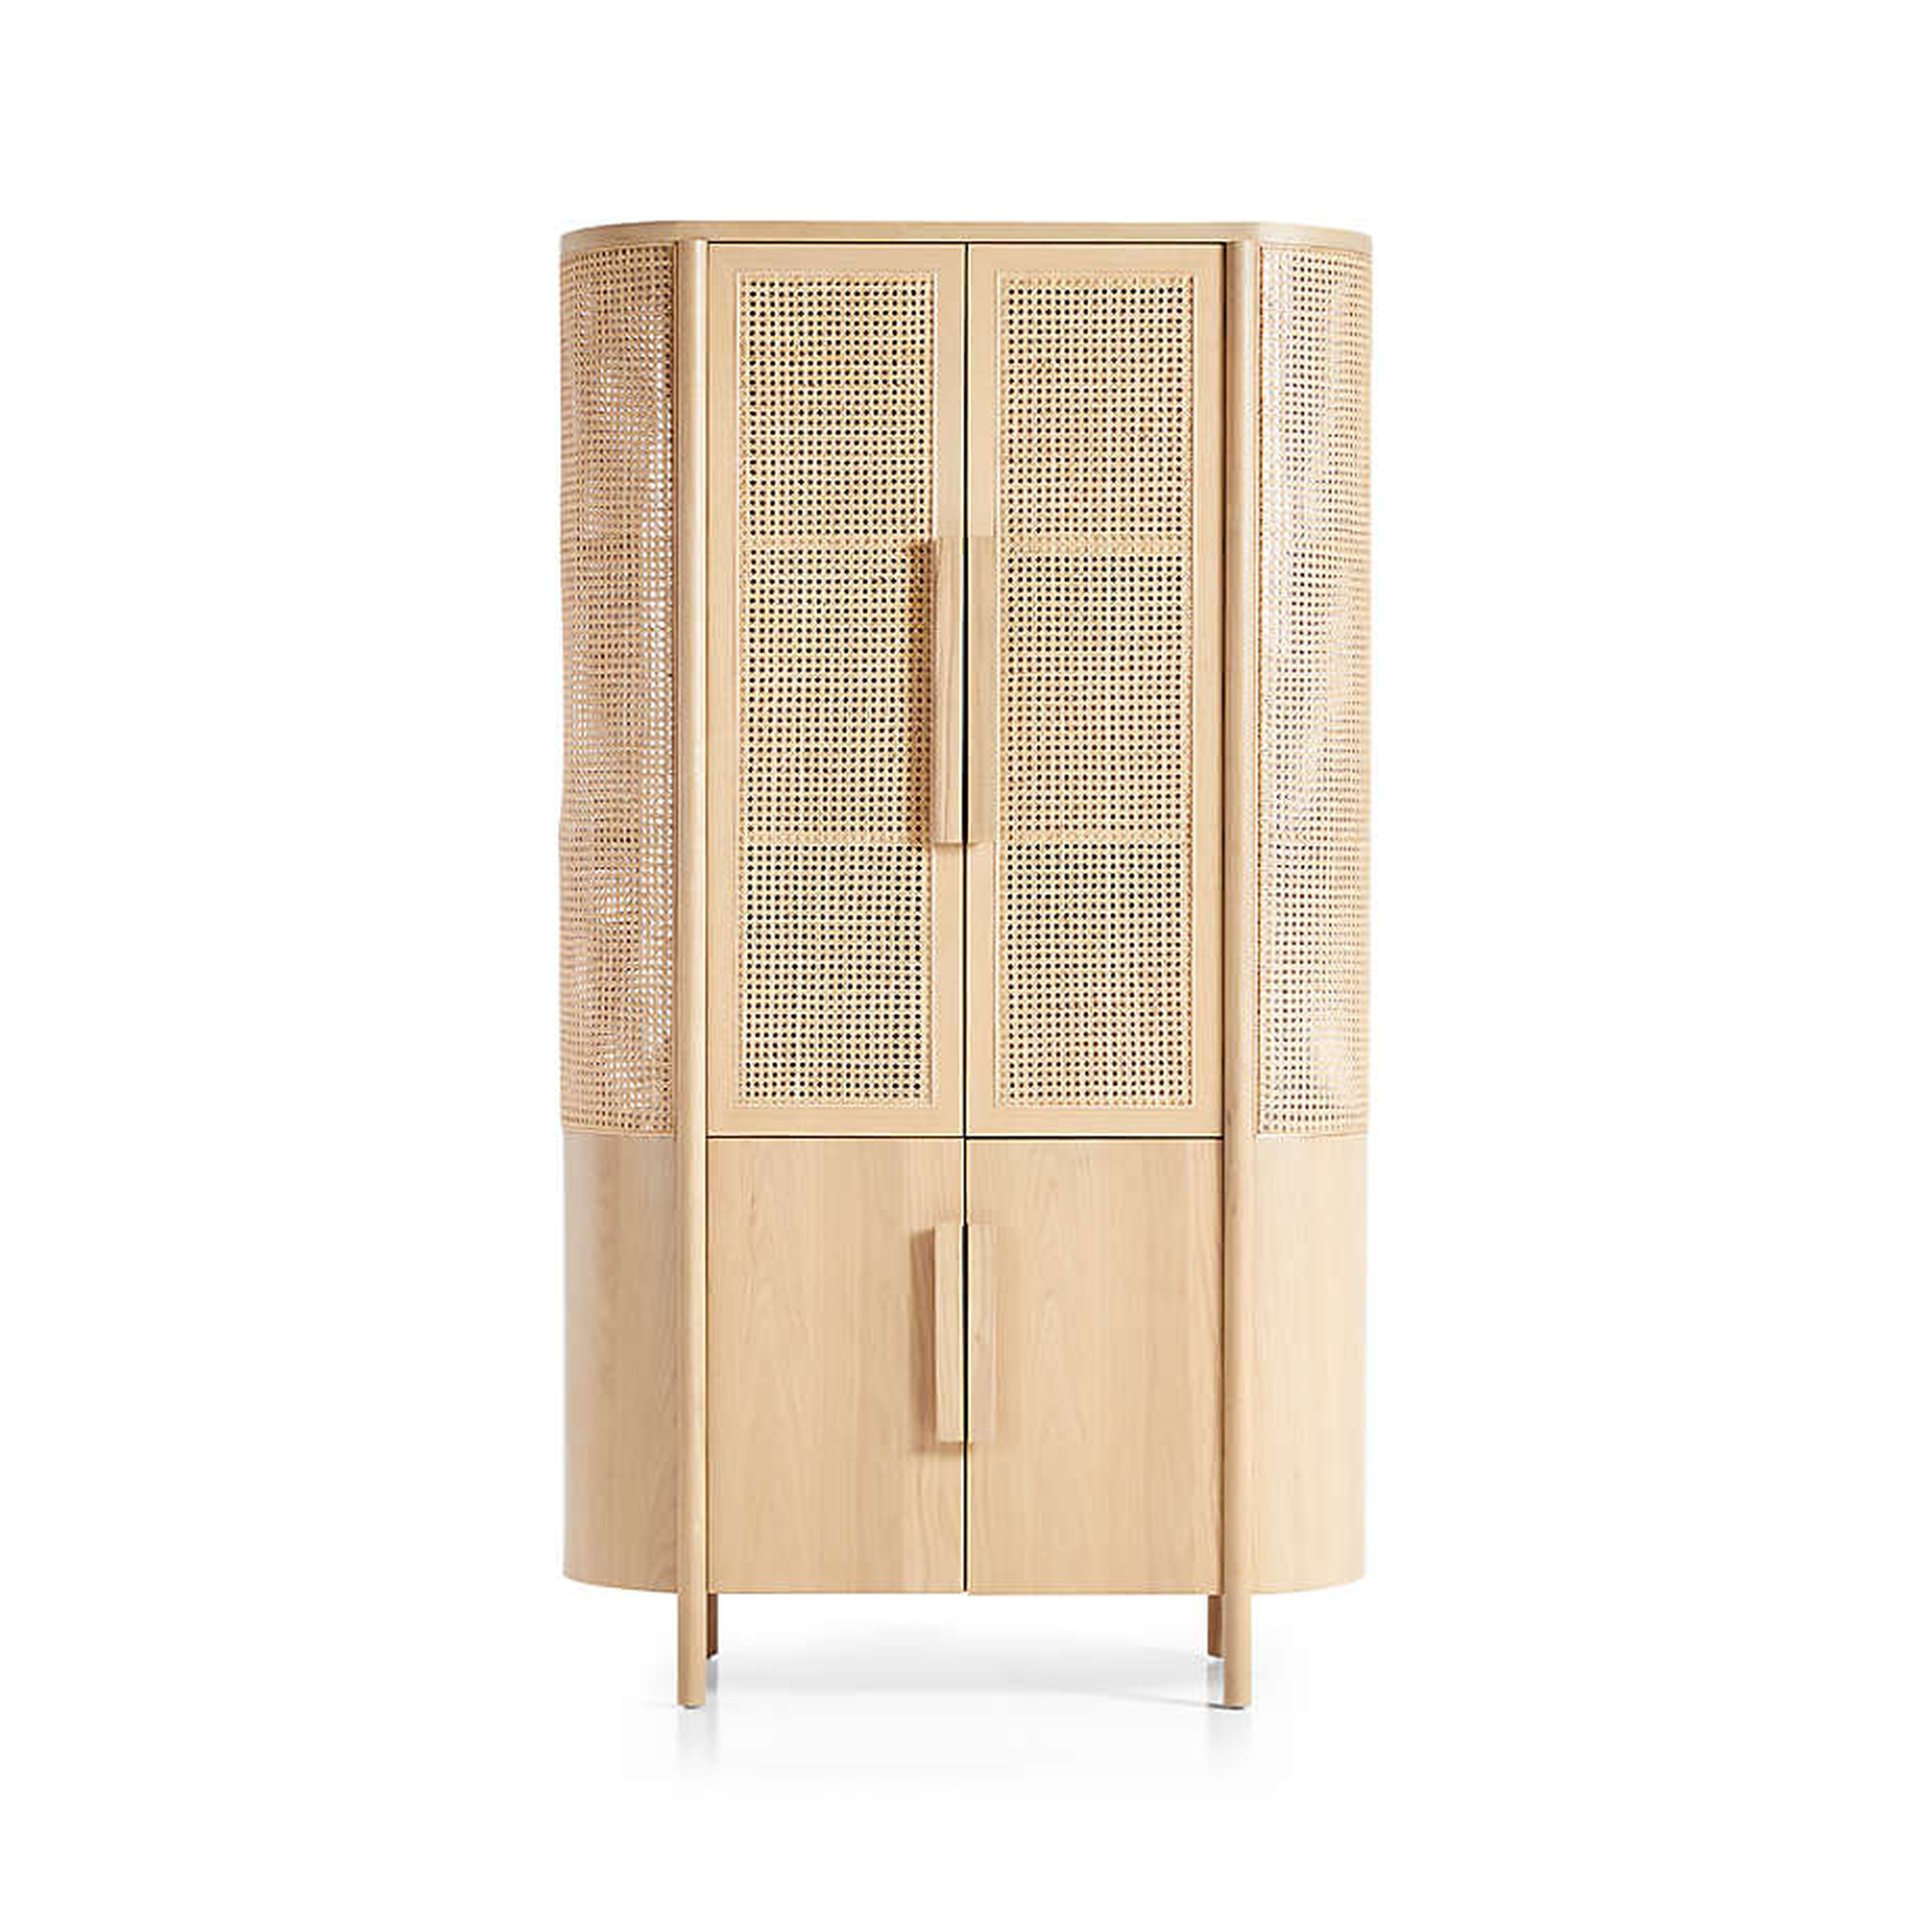 Fields Natural Storage Cabinet by Leanne Ford - Crate and Barrel